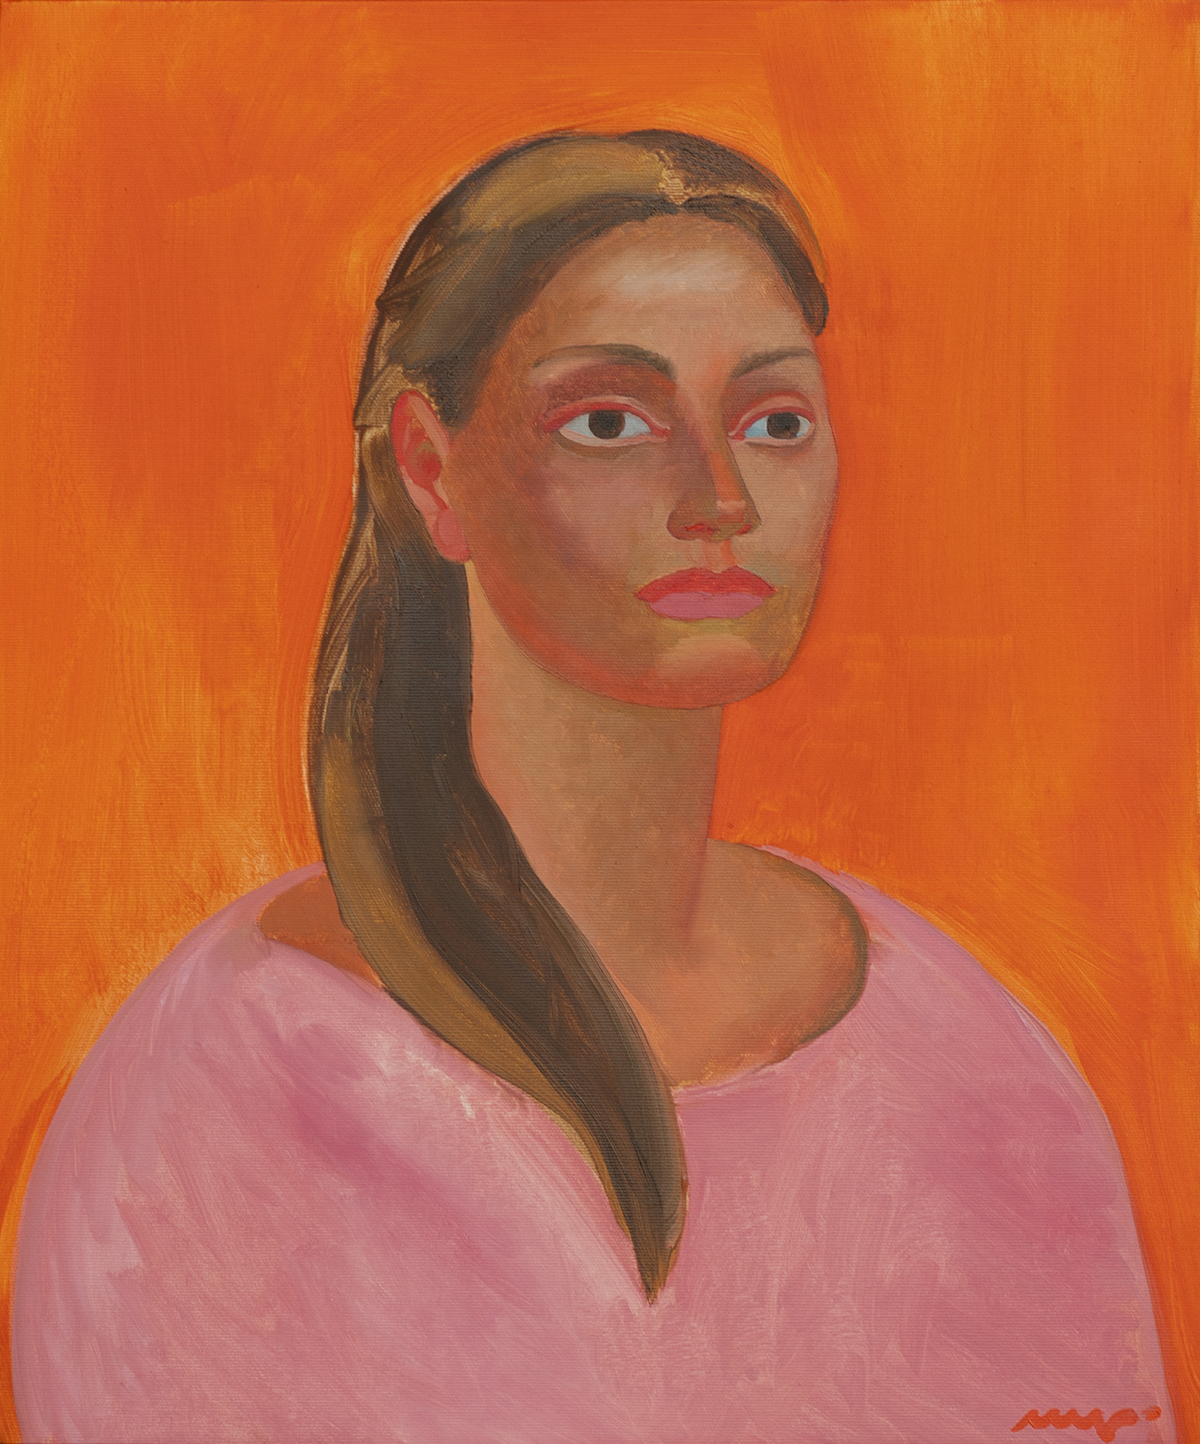 Tomina, Oil on Canvas, 55x46cm. 2019